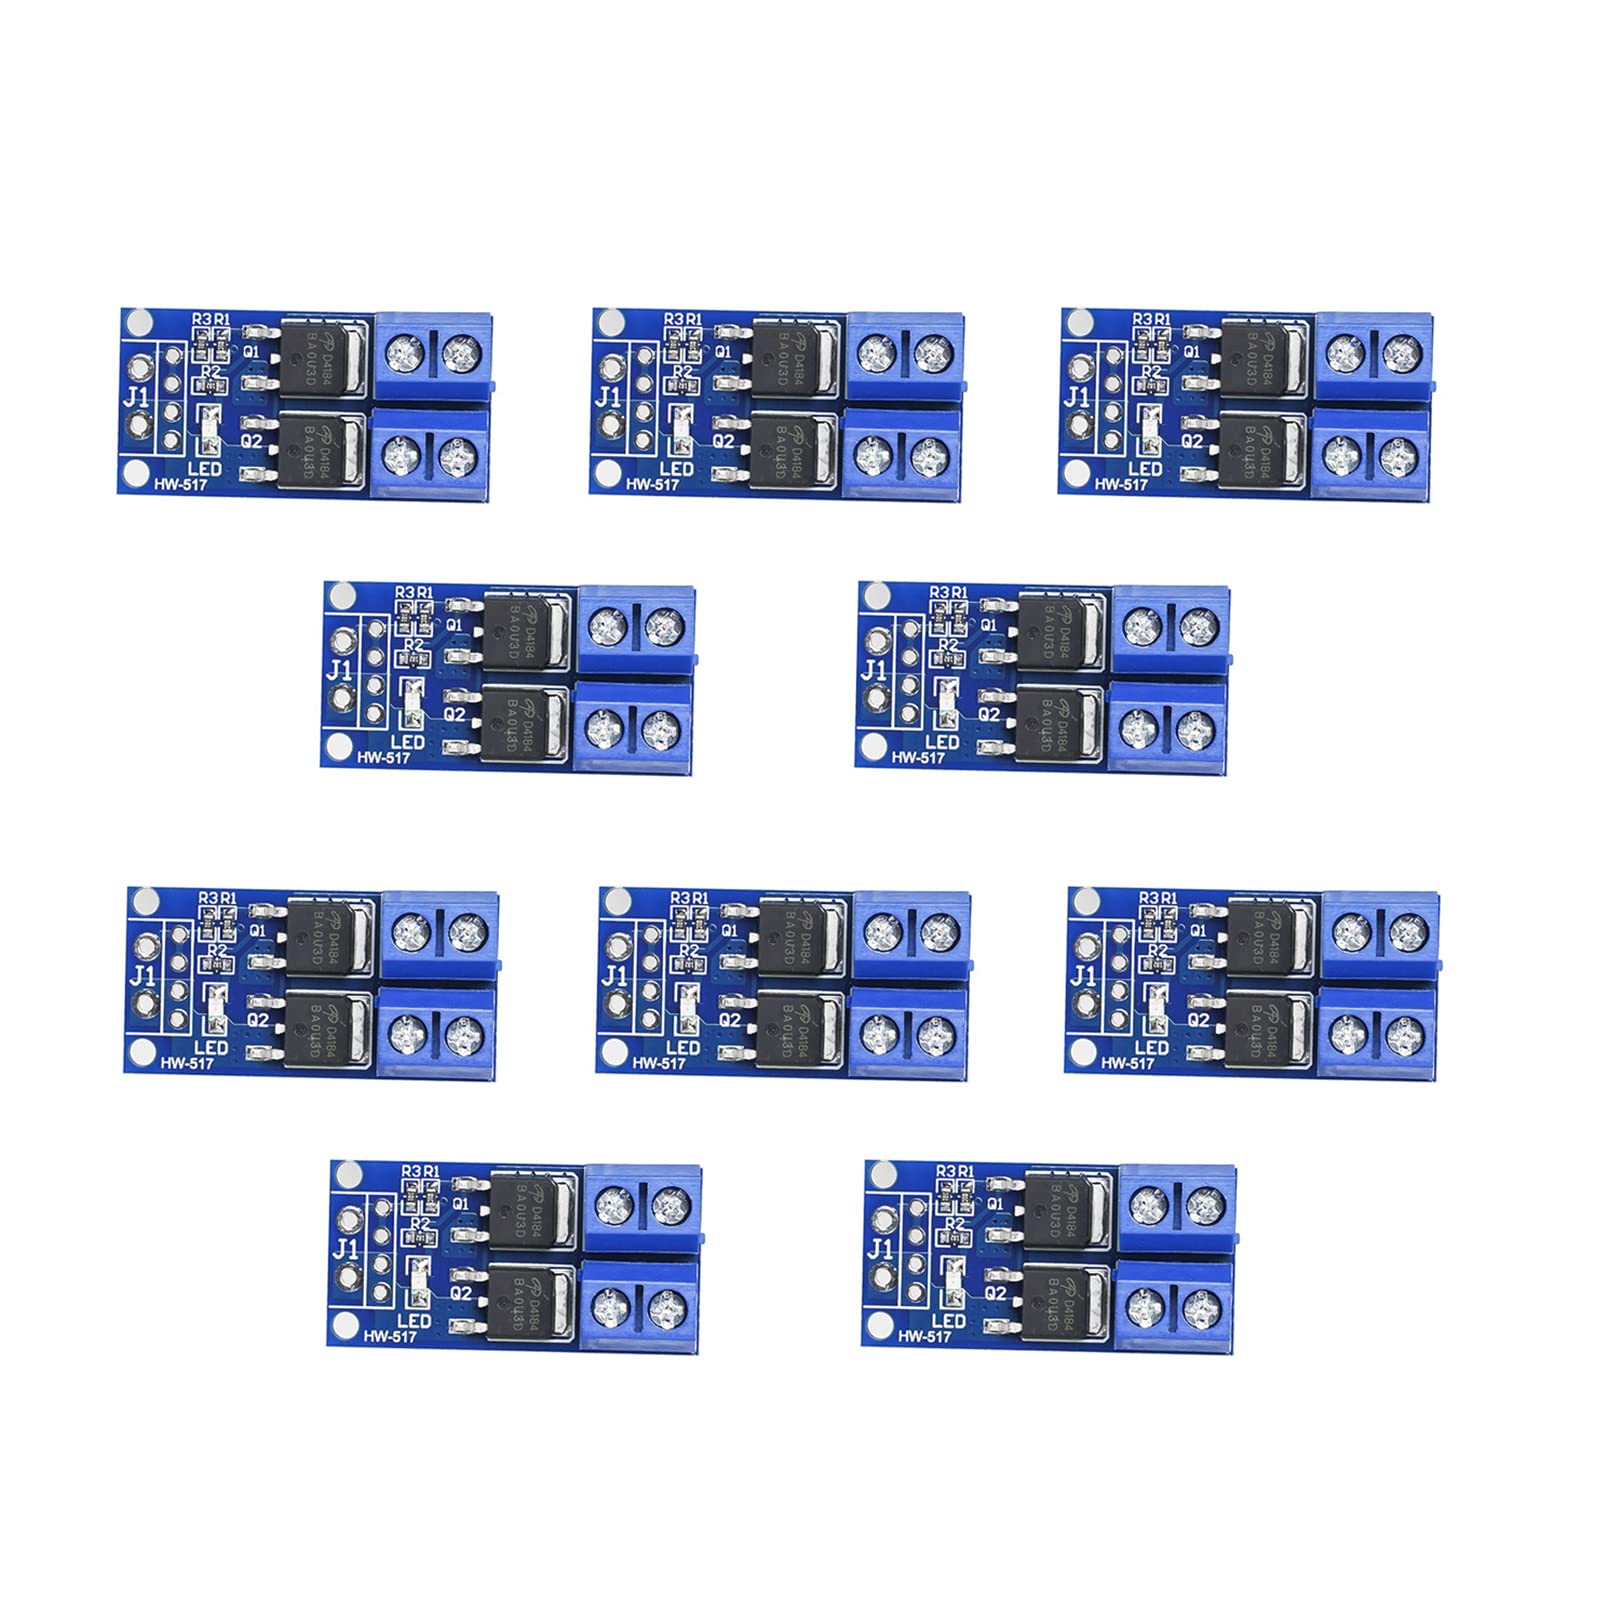 Teyleten Robot DC 5V-36V 15A Max 30A 400W Dual High-Power MOSFET Trigger Switch Drive Module 0-20KHz PWM Adjustment Electronic Switch Control Board DC Motor Speed Controller for Arduino 10pcs